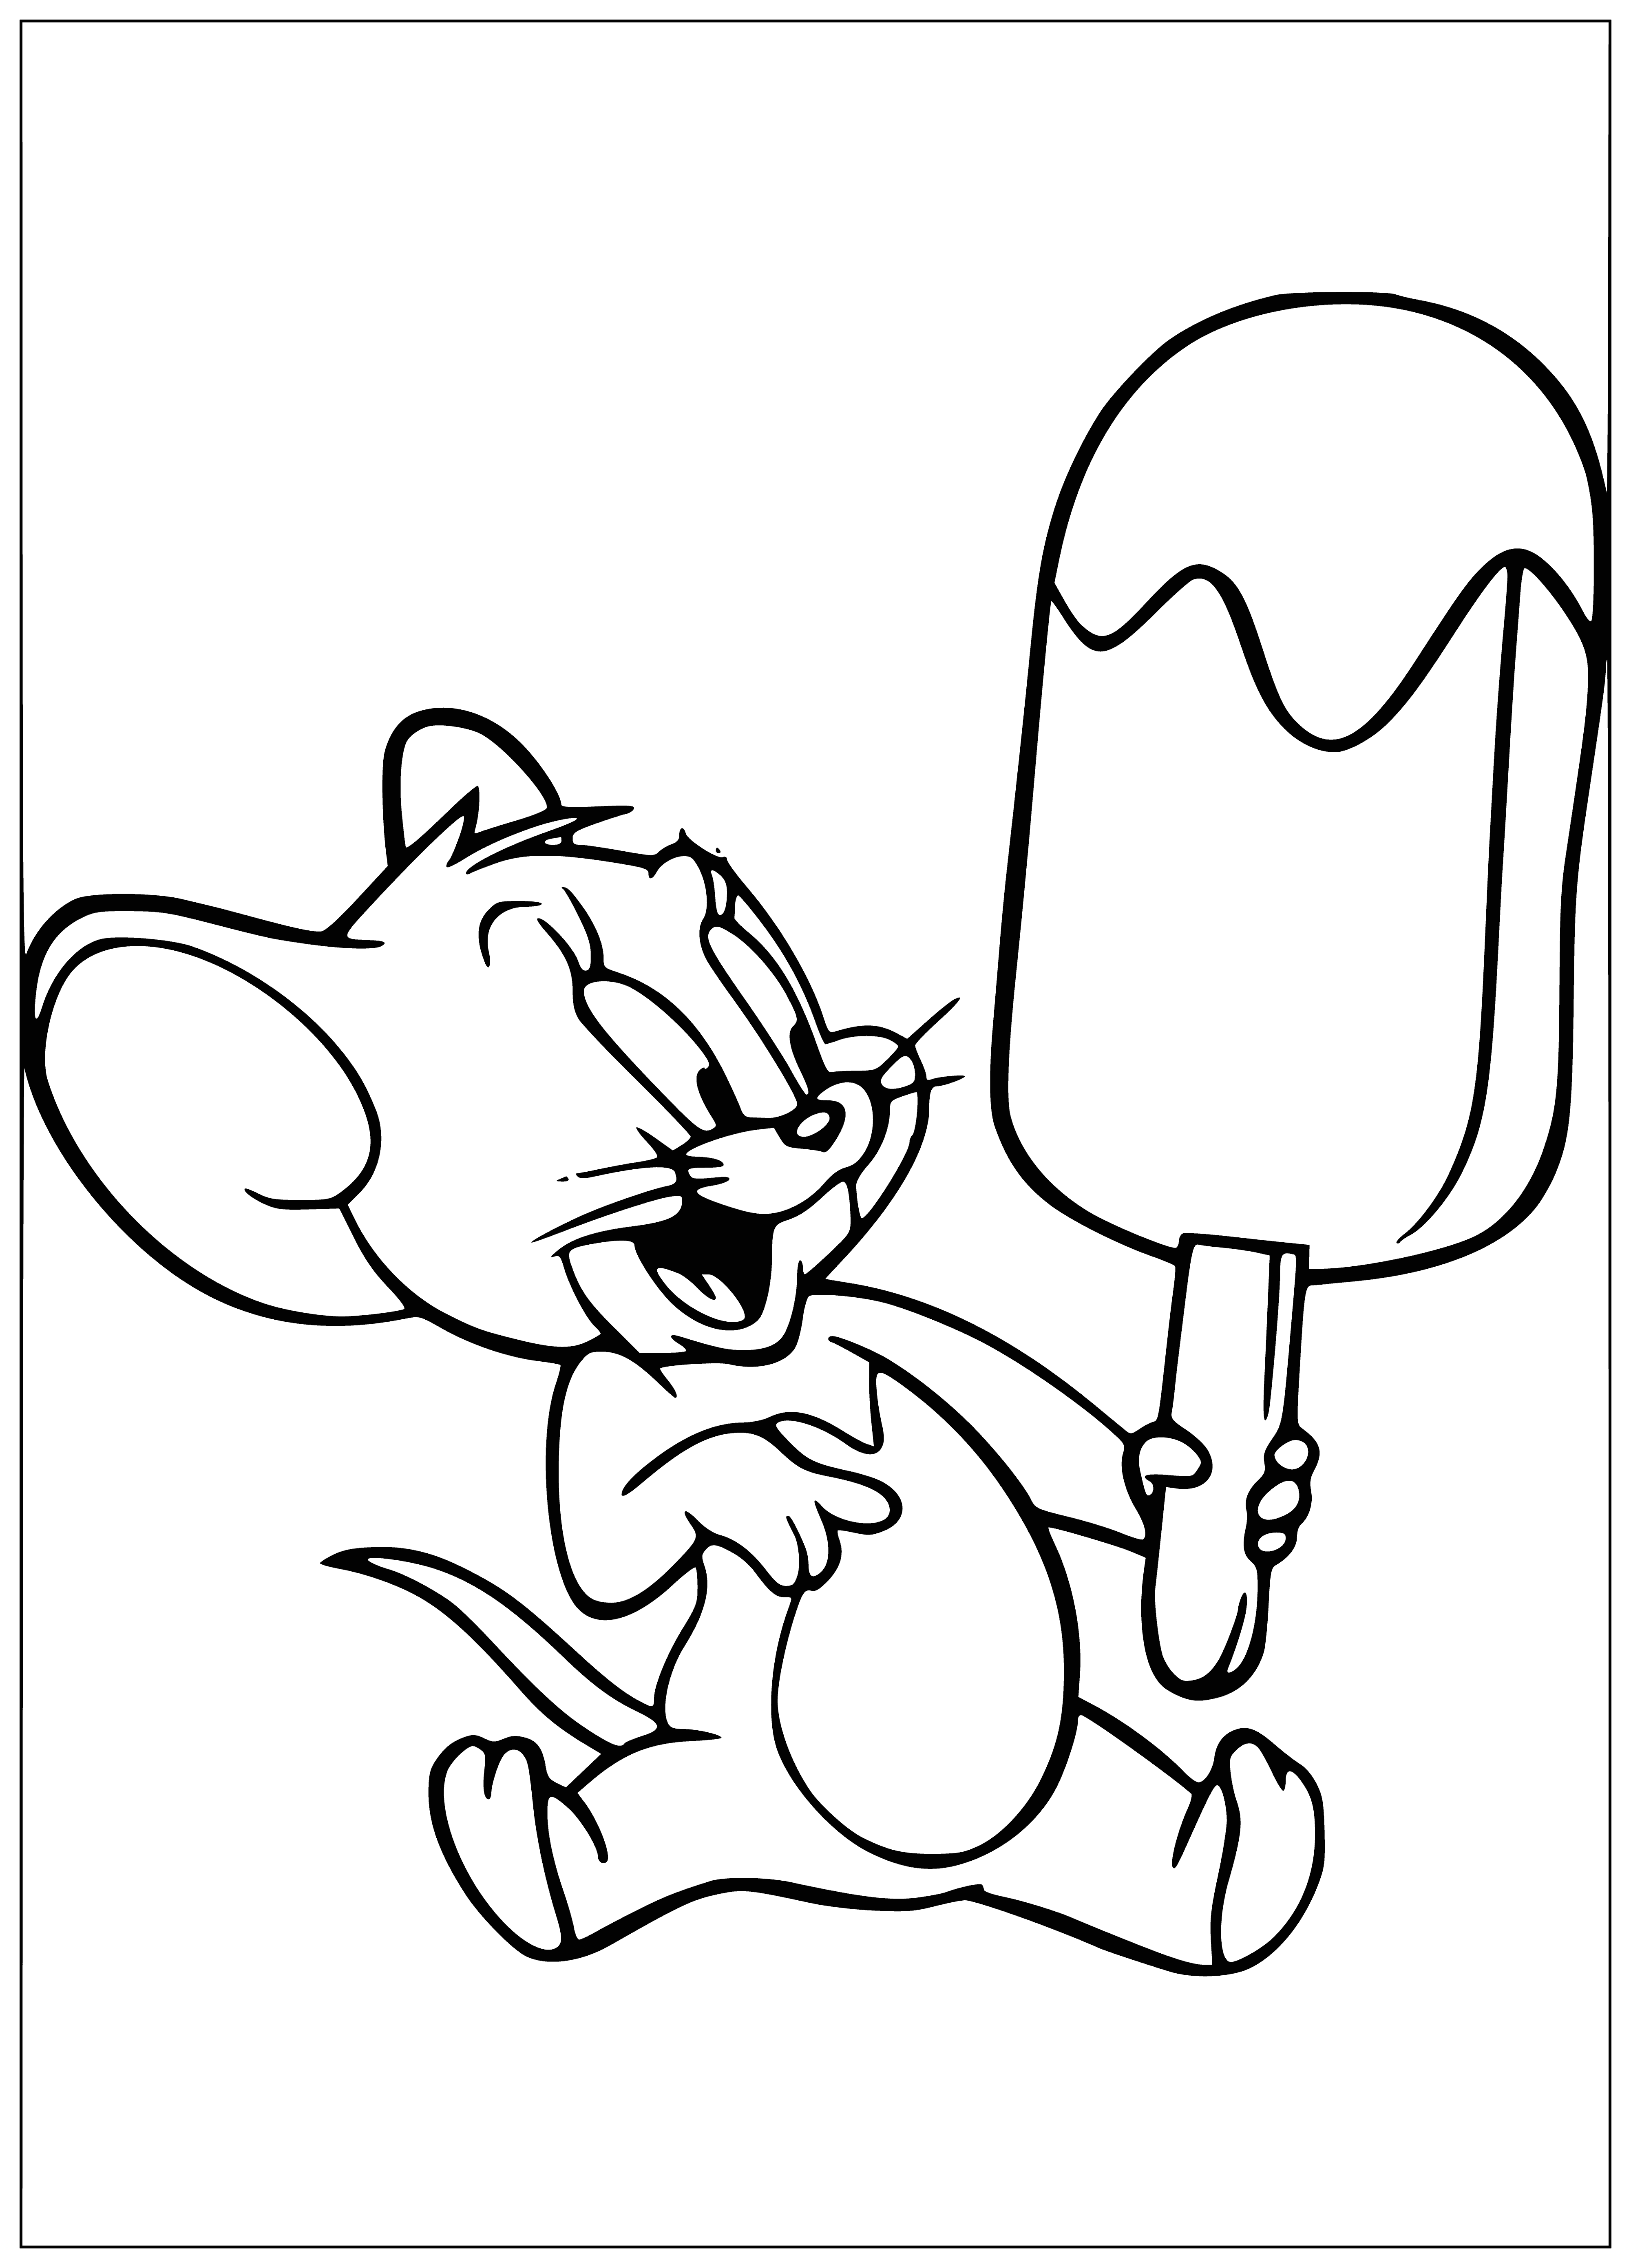 coloring page: Tomcat and JerryMouse are silhouetted in the middle of the frame, with Tom in the foreground hunched over while Jerry is running away in the background. Tom’s mouth is open as Jerry has his arms up, running swiftly away. A melting popsicle lies in a puddle on the ground behind them.